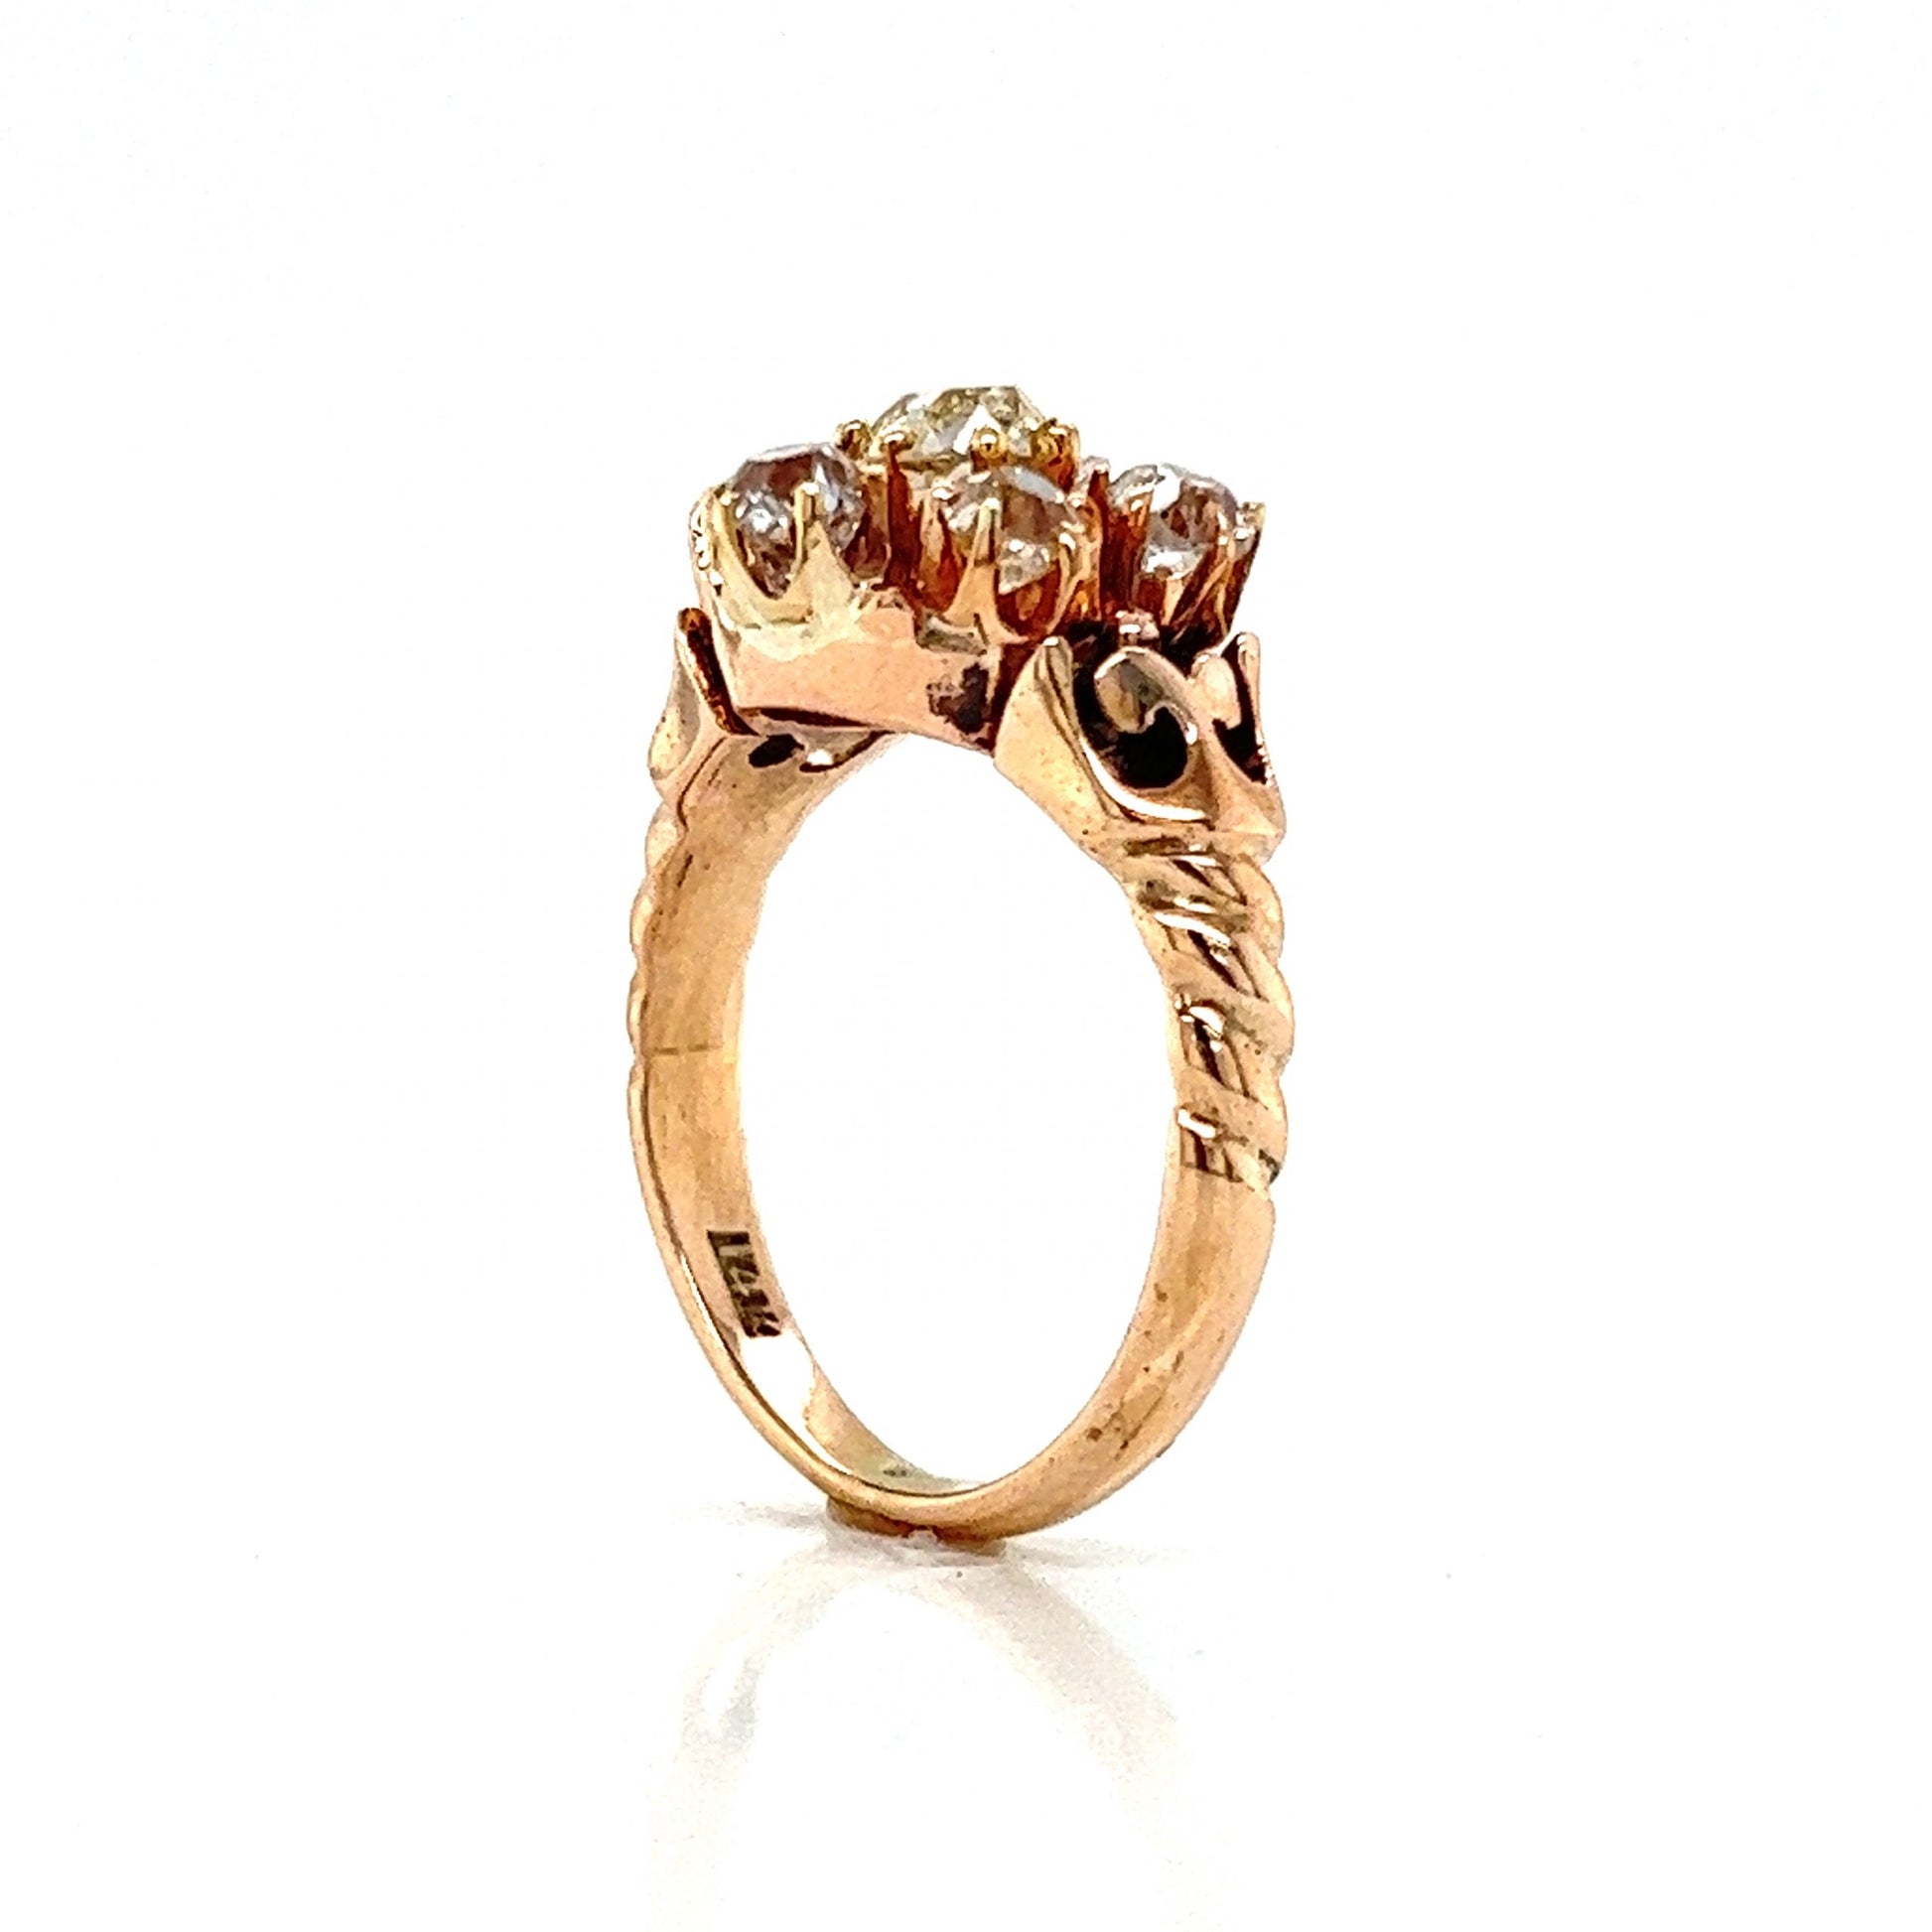 Victorian Cluster Diamond Ring in 14k Yellow GoldComposition: 14 Karat Yellow GoldRing Size: 6Total Diamond Weight: 1.40 ctTotal Gram Weight: 4.0 gInscription: 14k